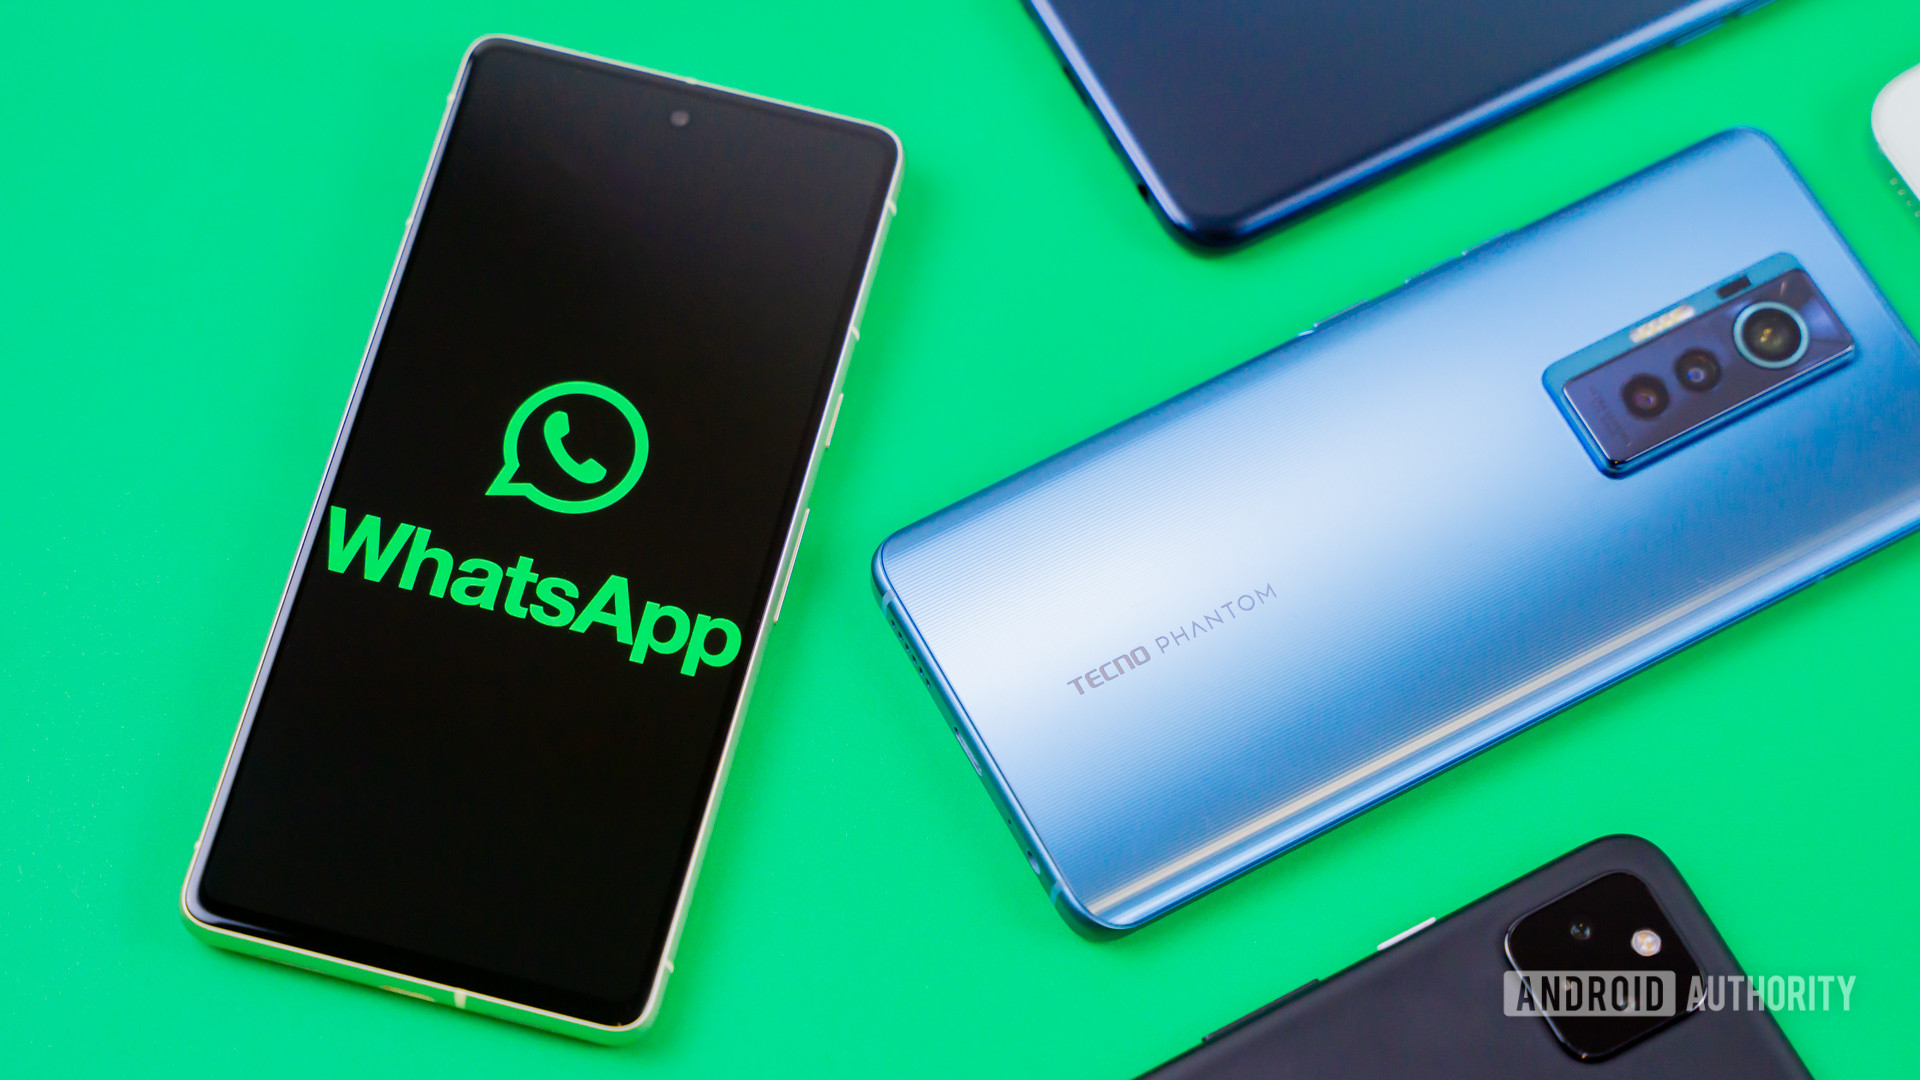 WhatsApp logo on smartphone next to other devices Stock photo 4